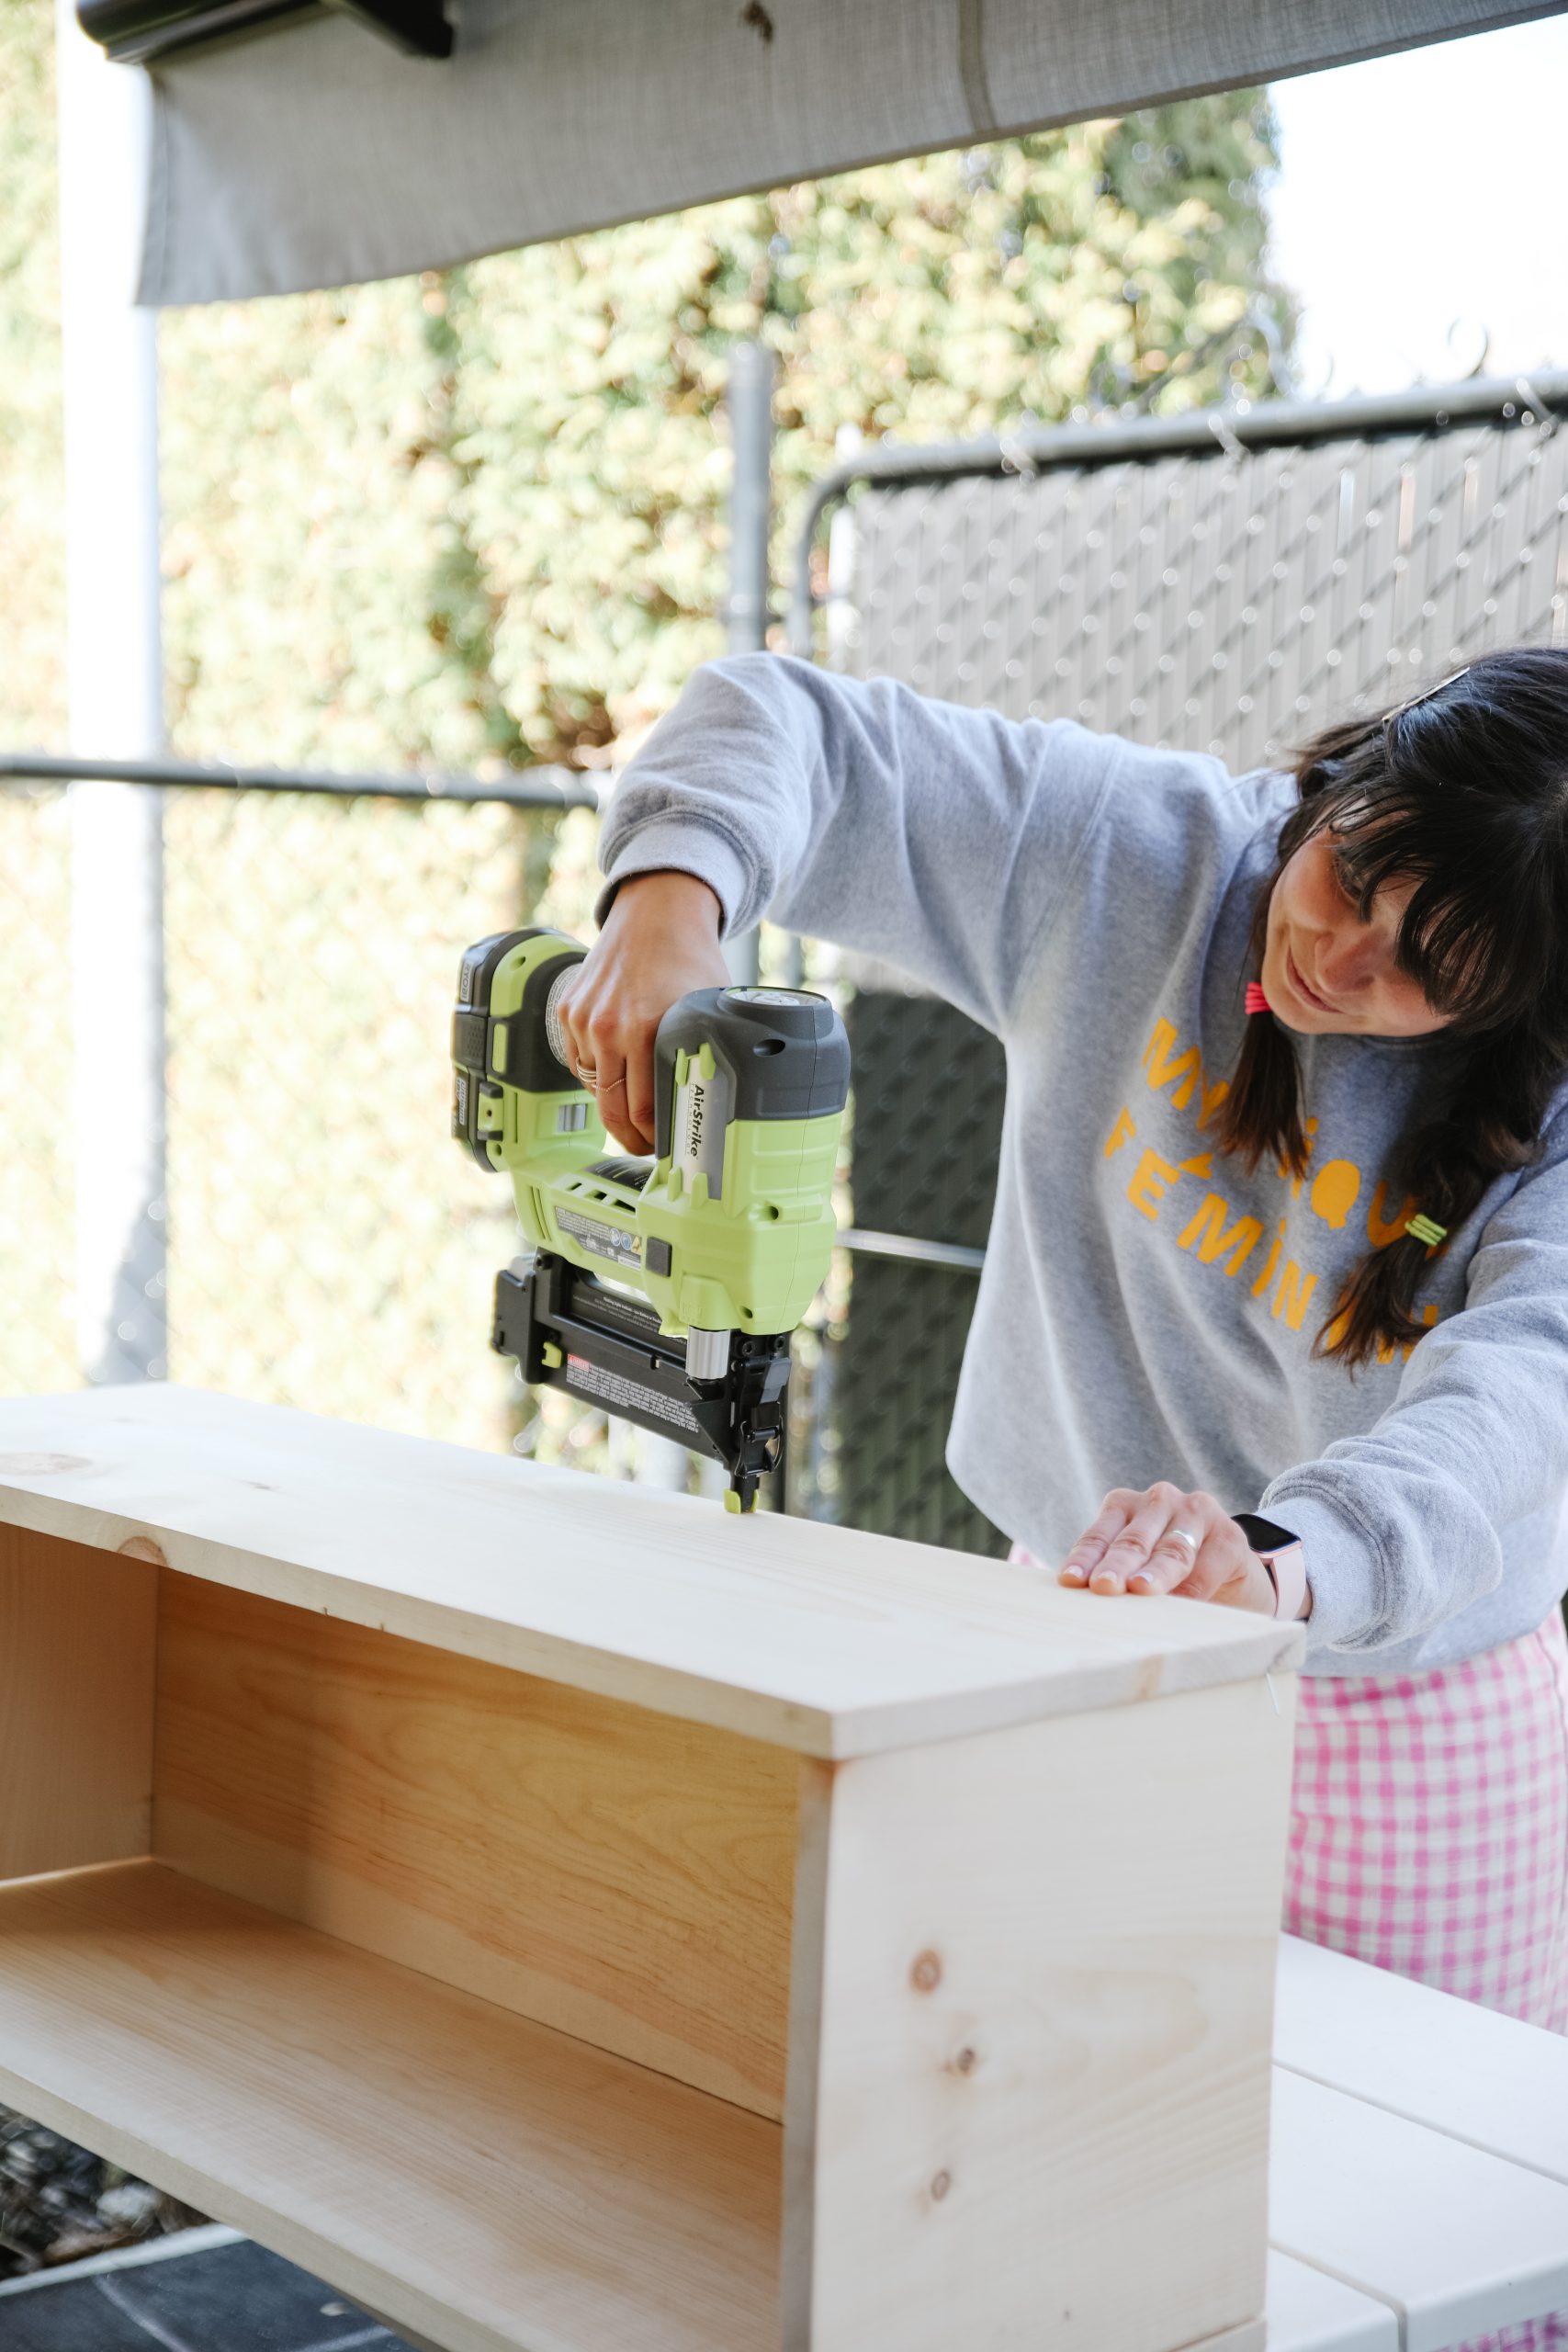 Maca assembling the DIY planter box by attaching pieces together.